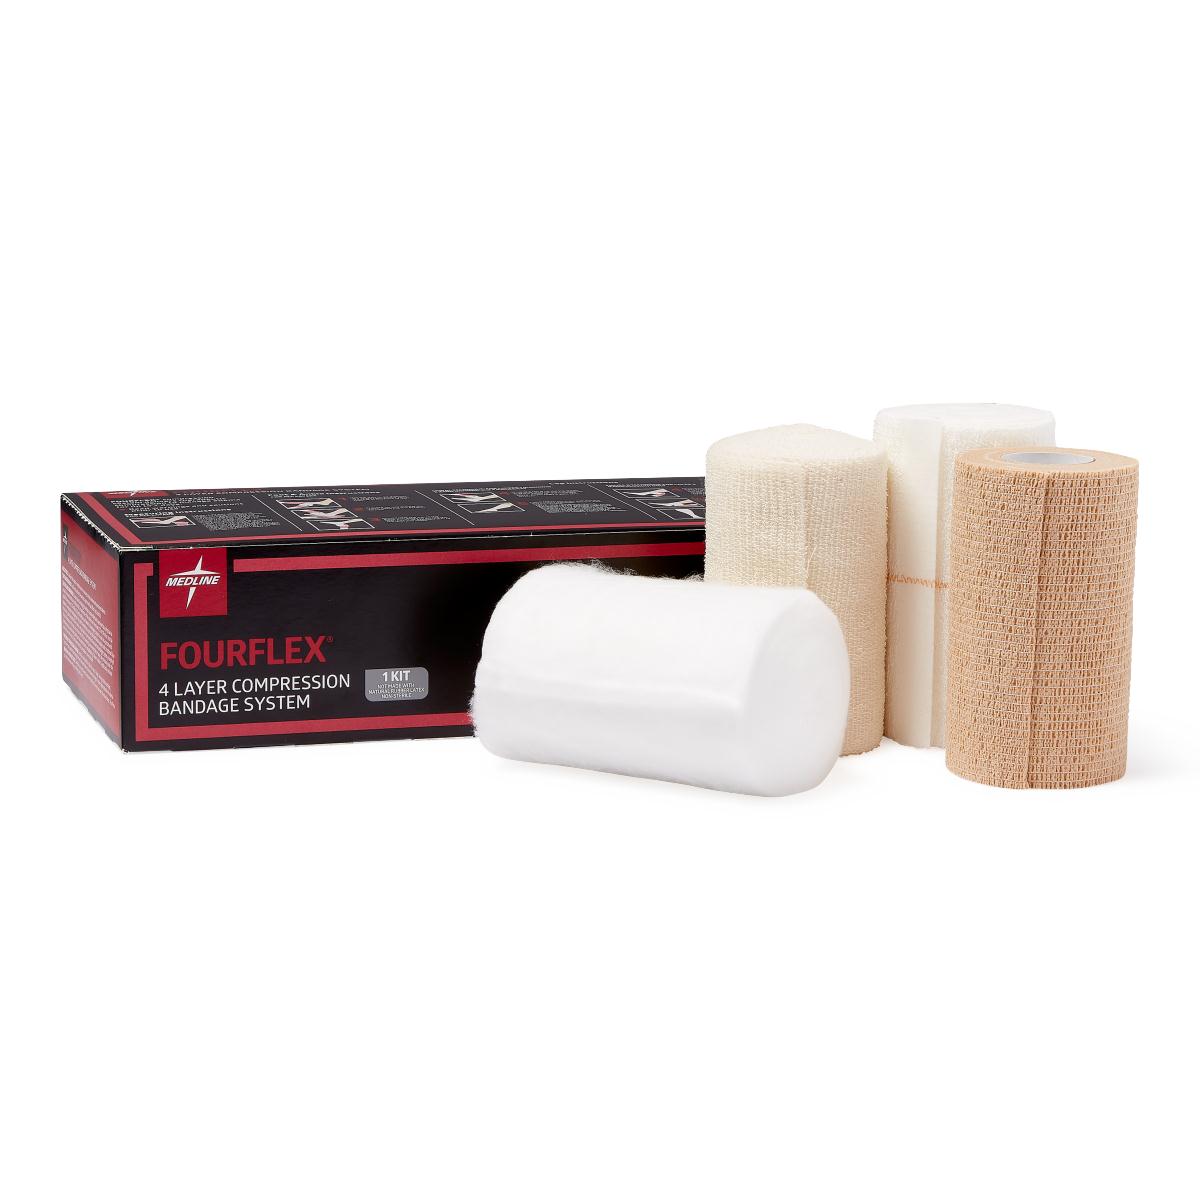 8 Kit-Case / Leg / Max: 7 Day: Check Drainage Wound Care - MEDLINE - Wasatch Medical Supply